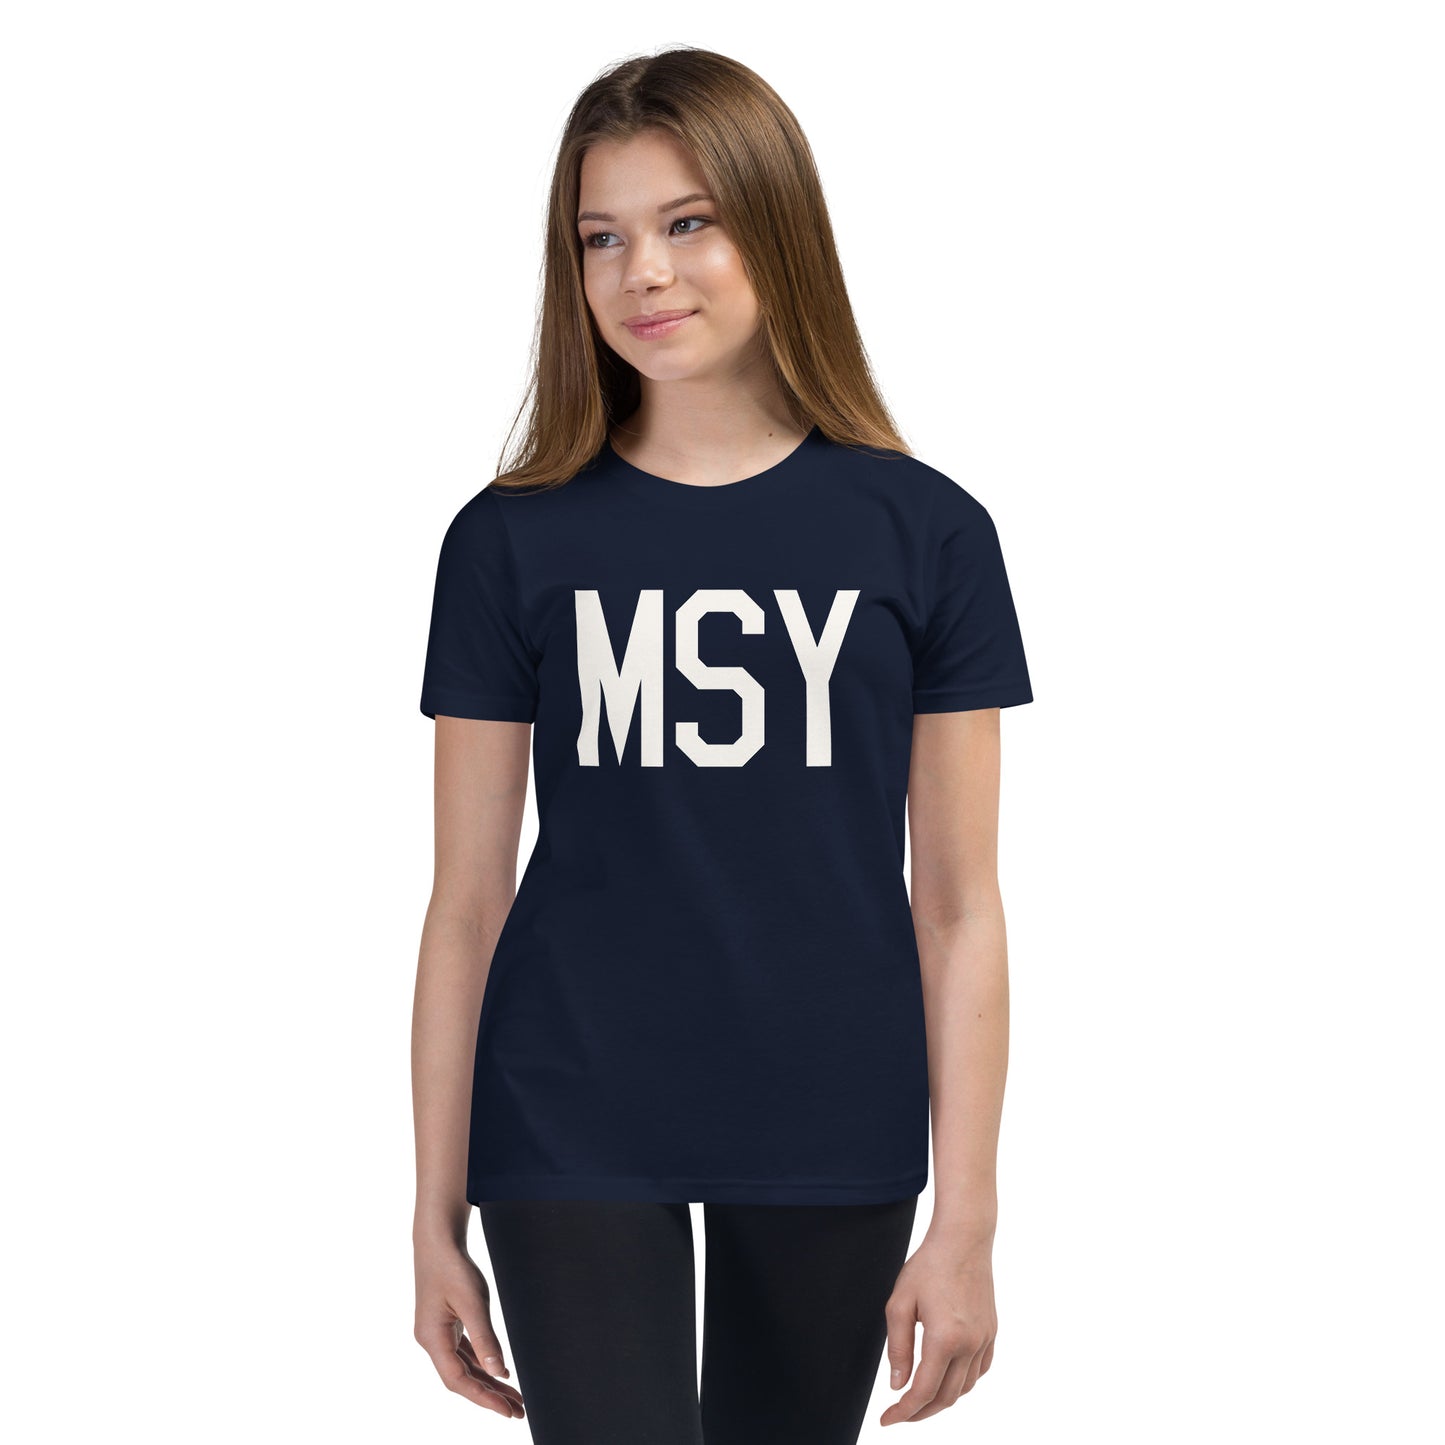 Kid's T-Shirt - White Graphic • MSY New Orleans • YHM Designs - Image 04